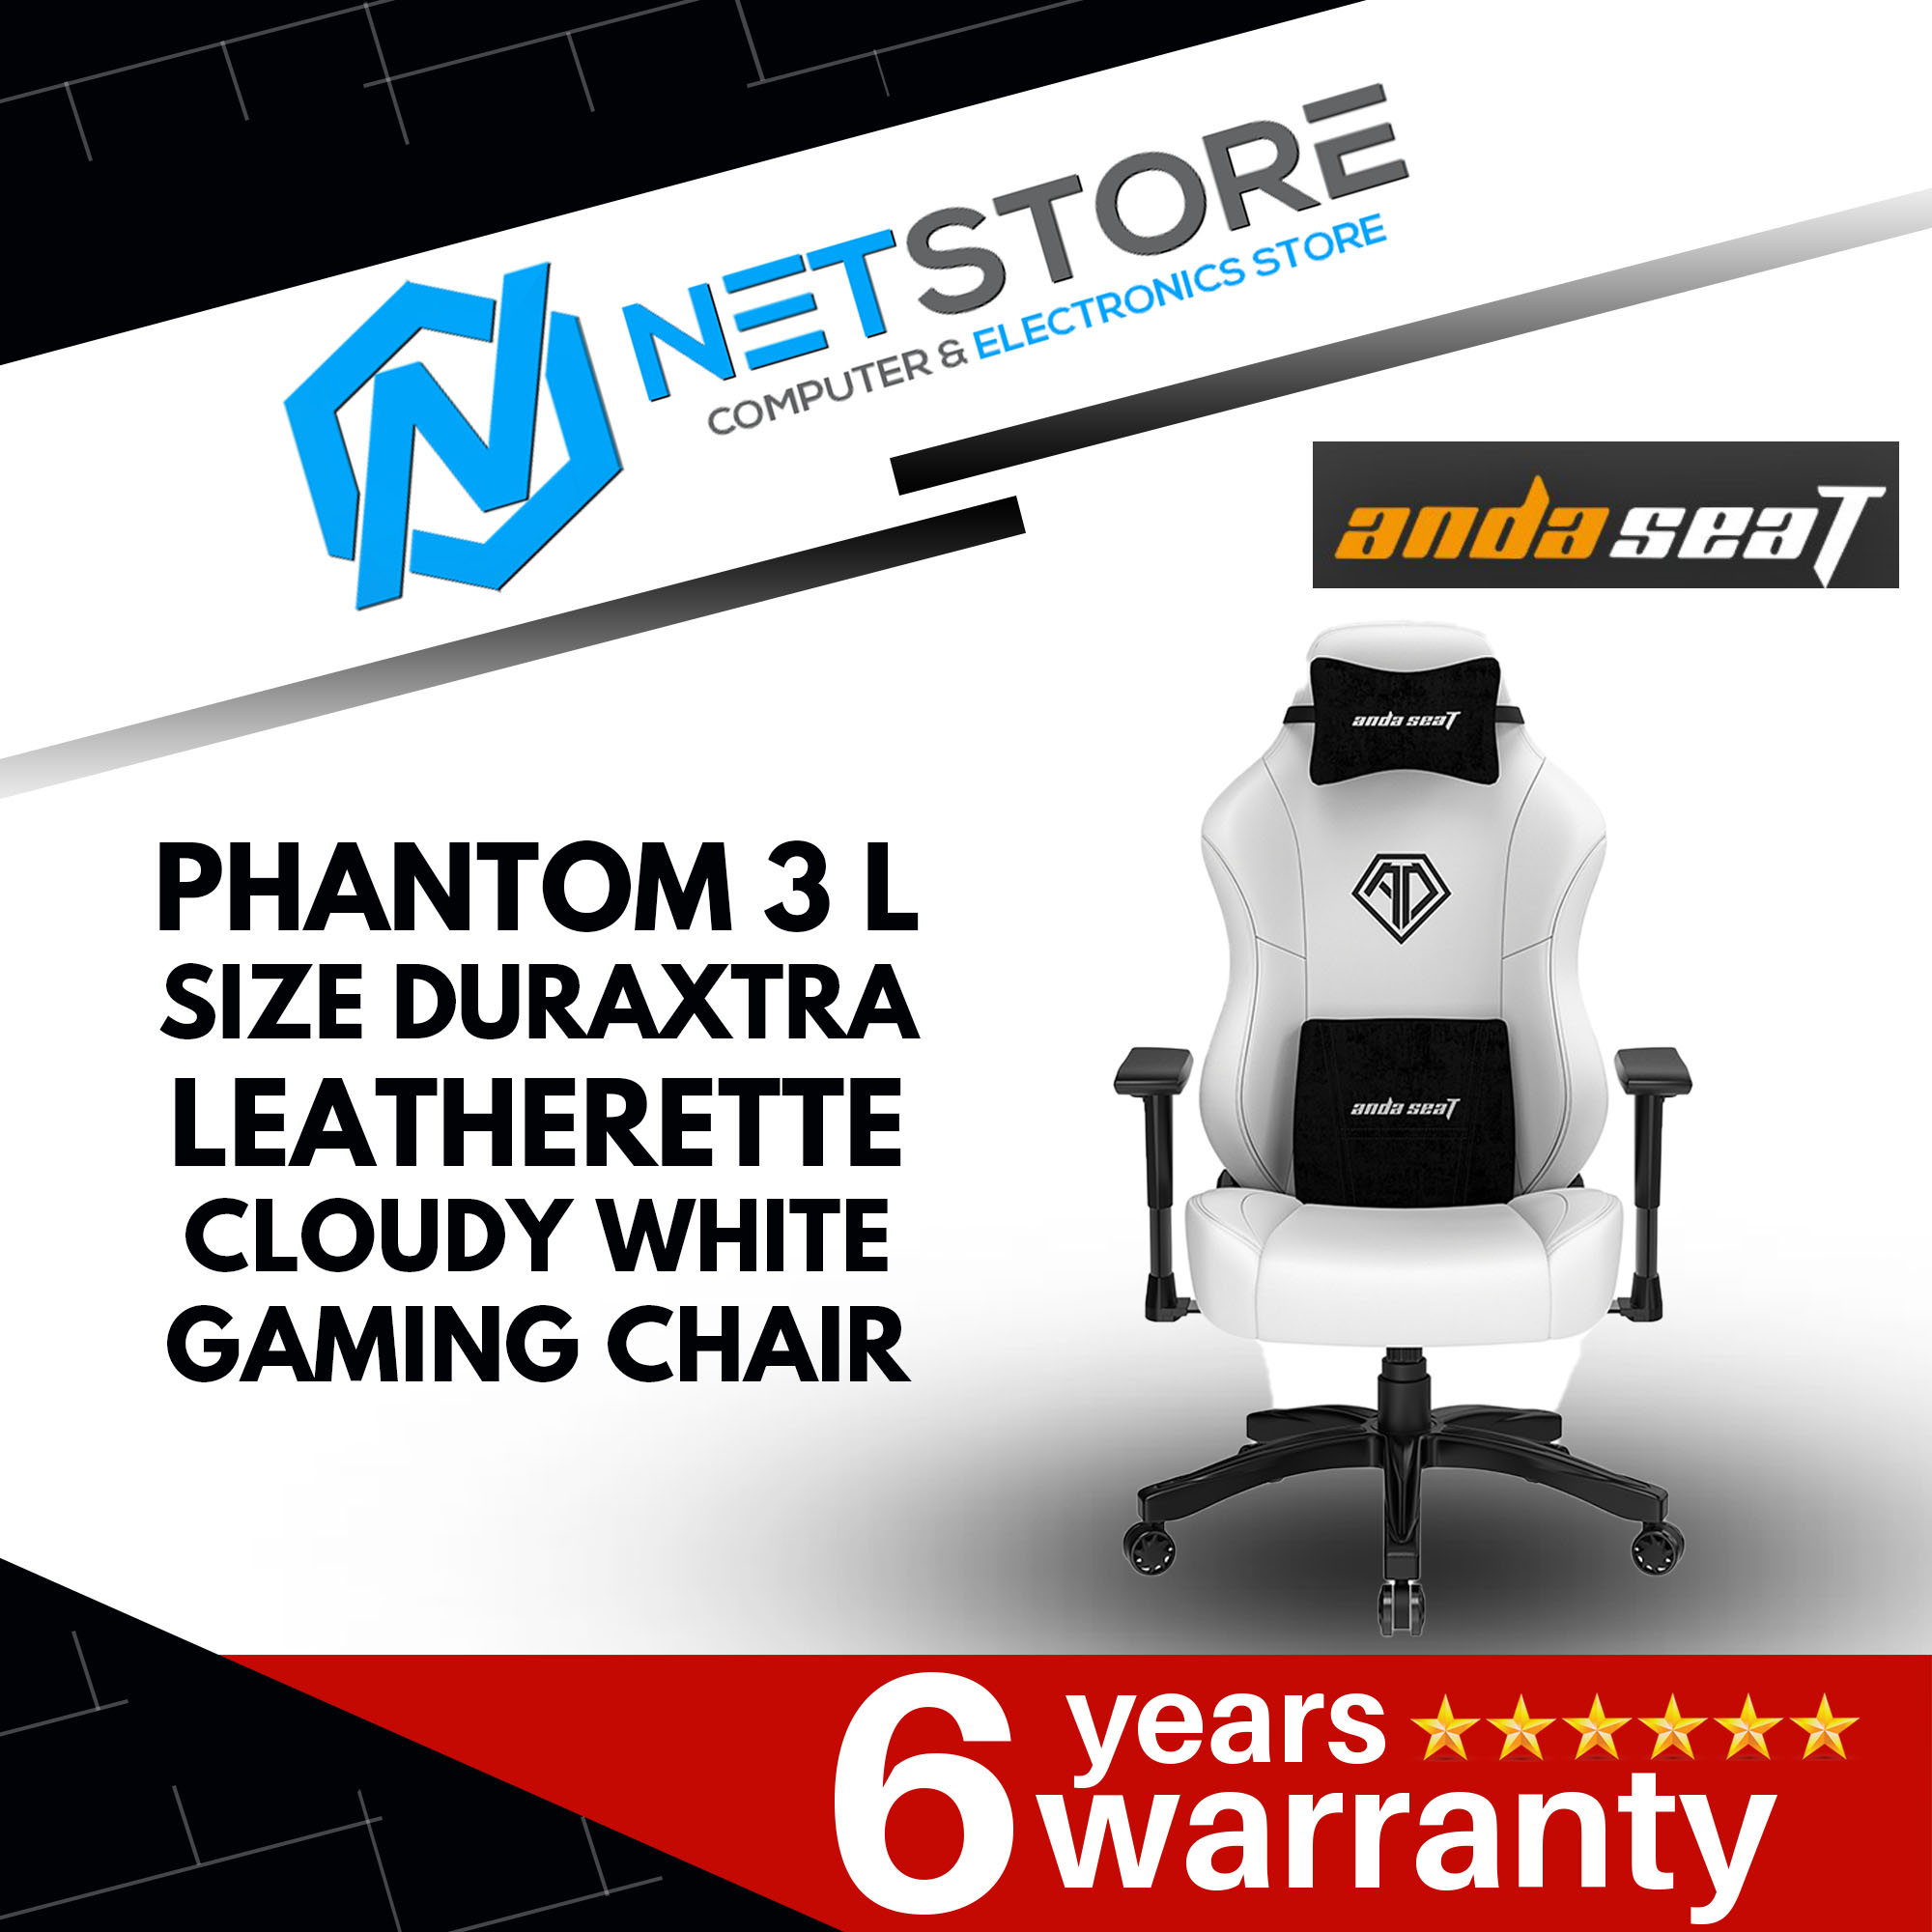 ANDA SEAT PHANTOM 3 L SIZE DURAXTRA LEATHERETTE - CLOUDY WHITE